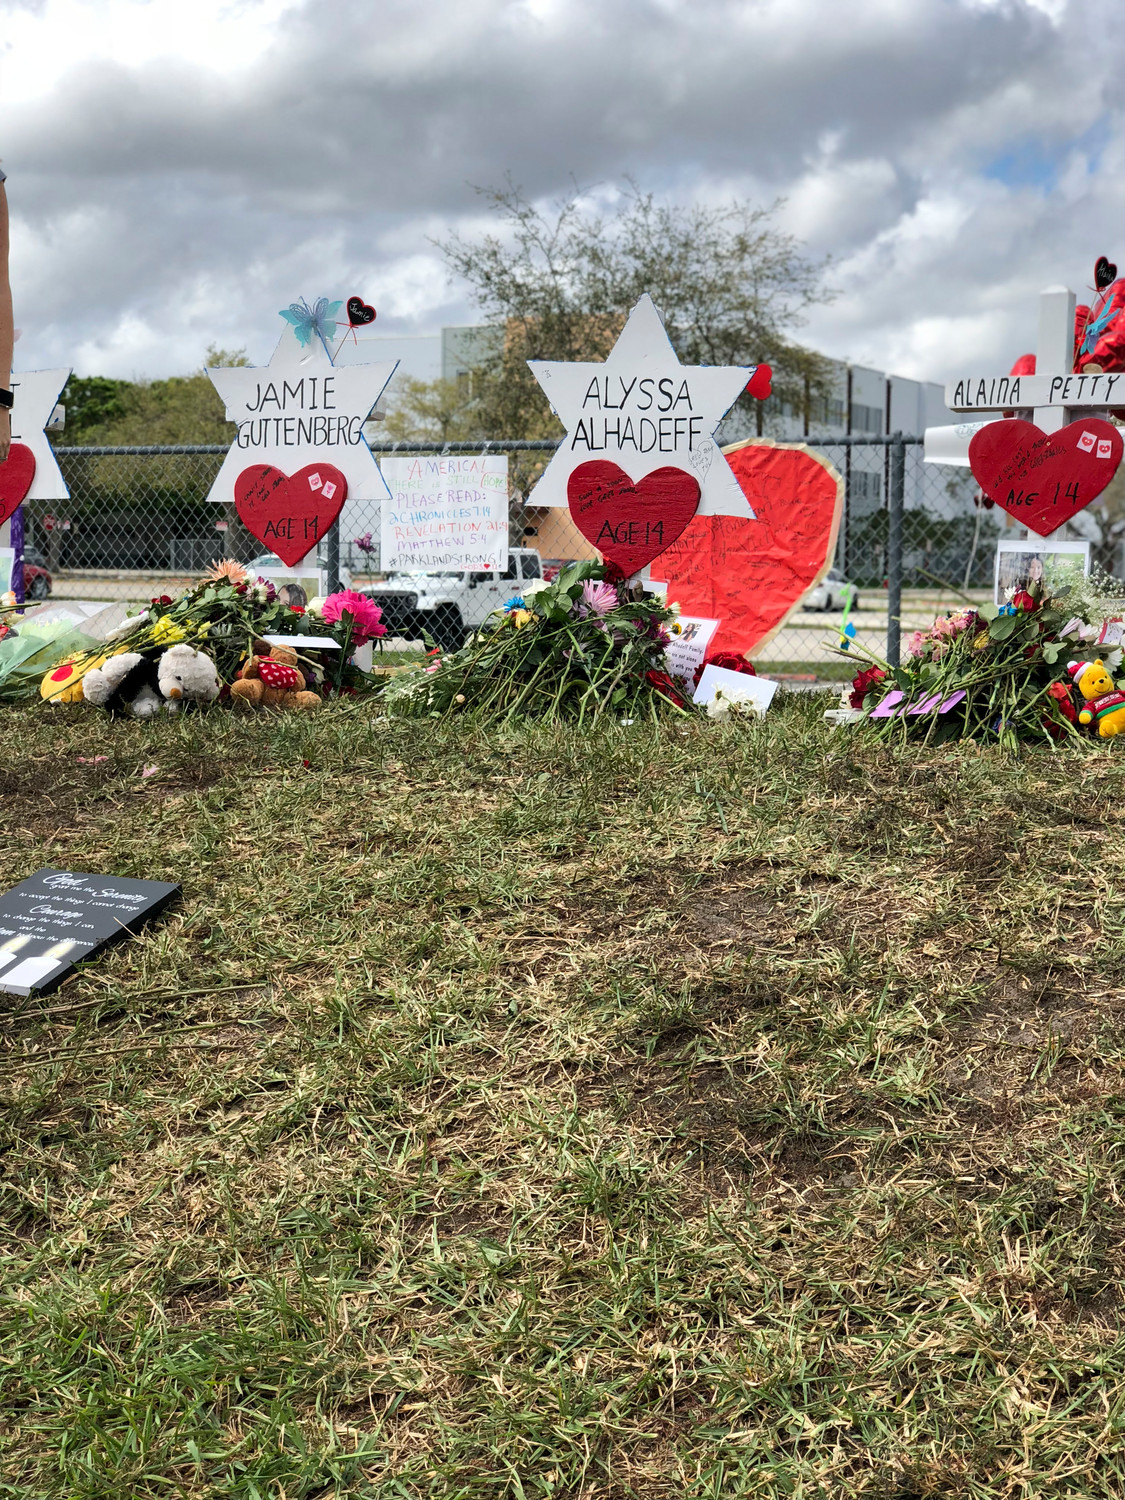 A vigil at Marjory Stoneman Douglas High School after the shooting on Feb. 14 in which 17 people died.